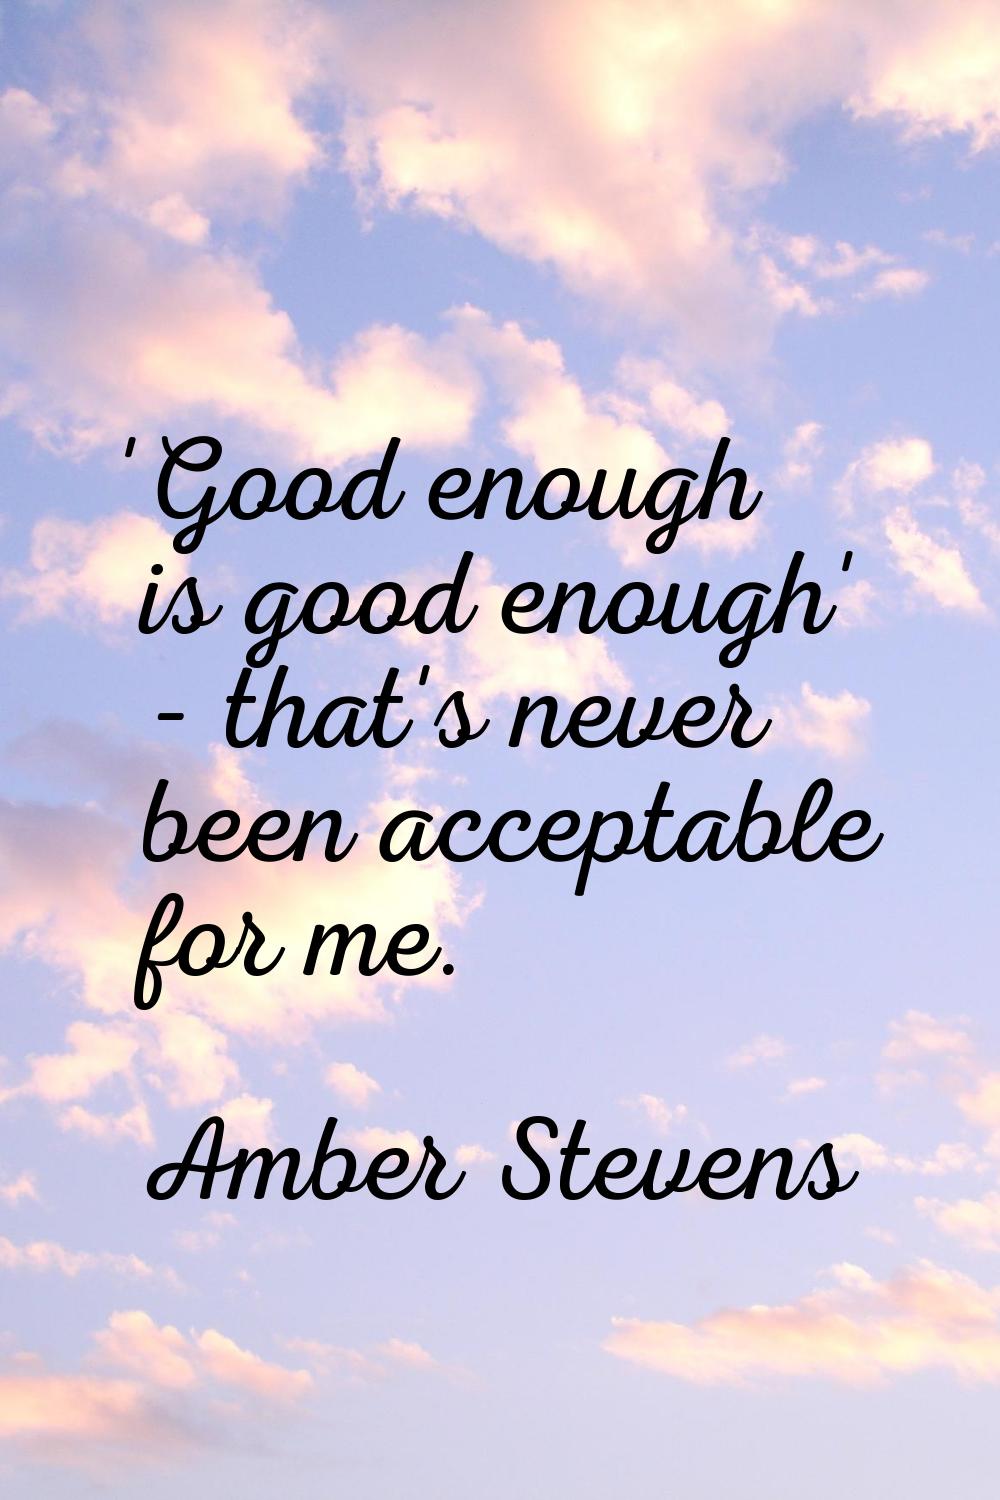 'Good enough is good enough' - that's never been acceptable for me.